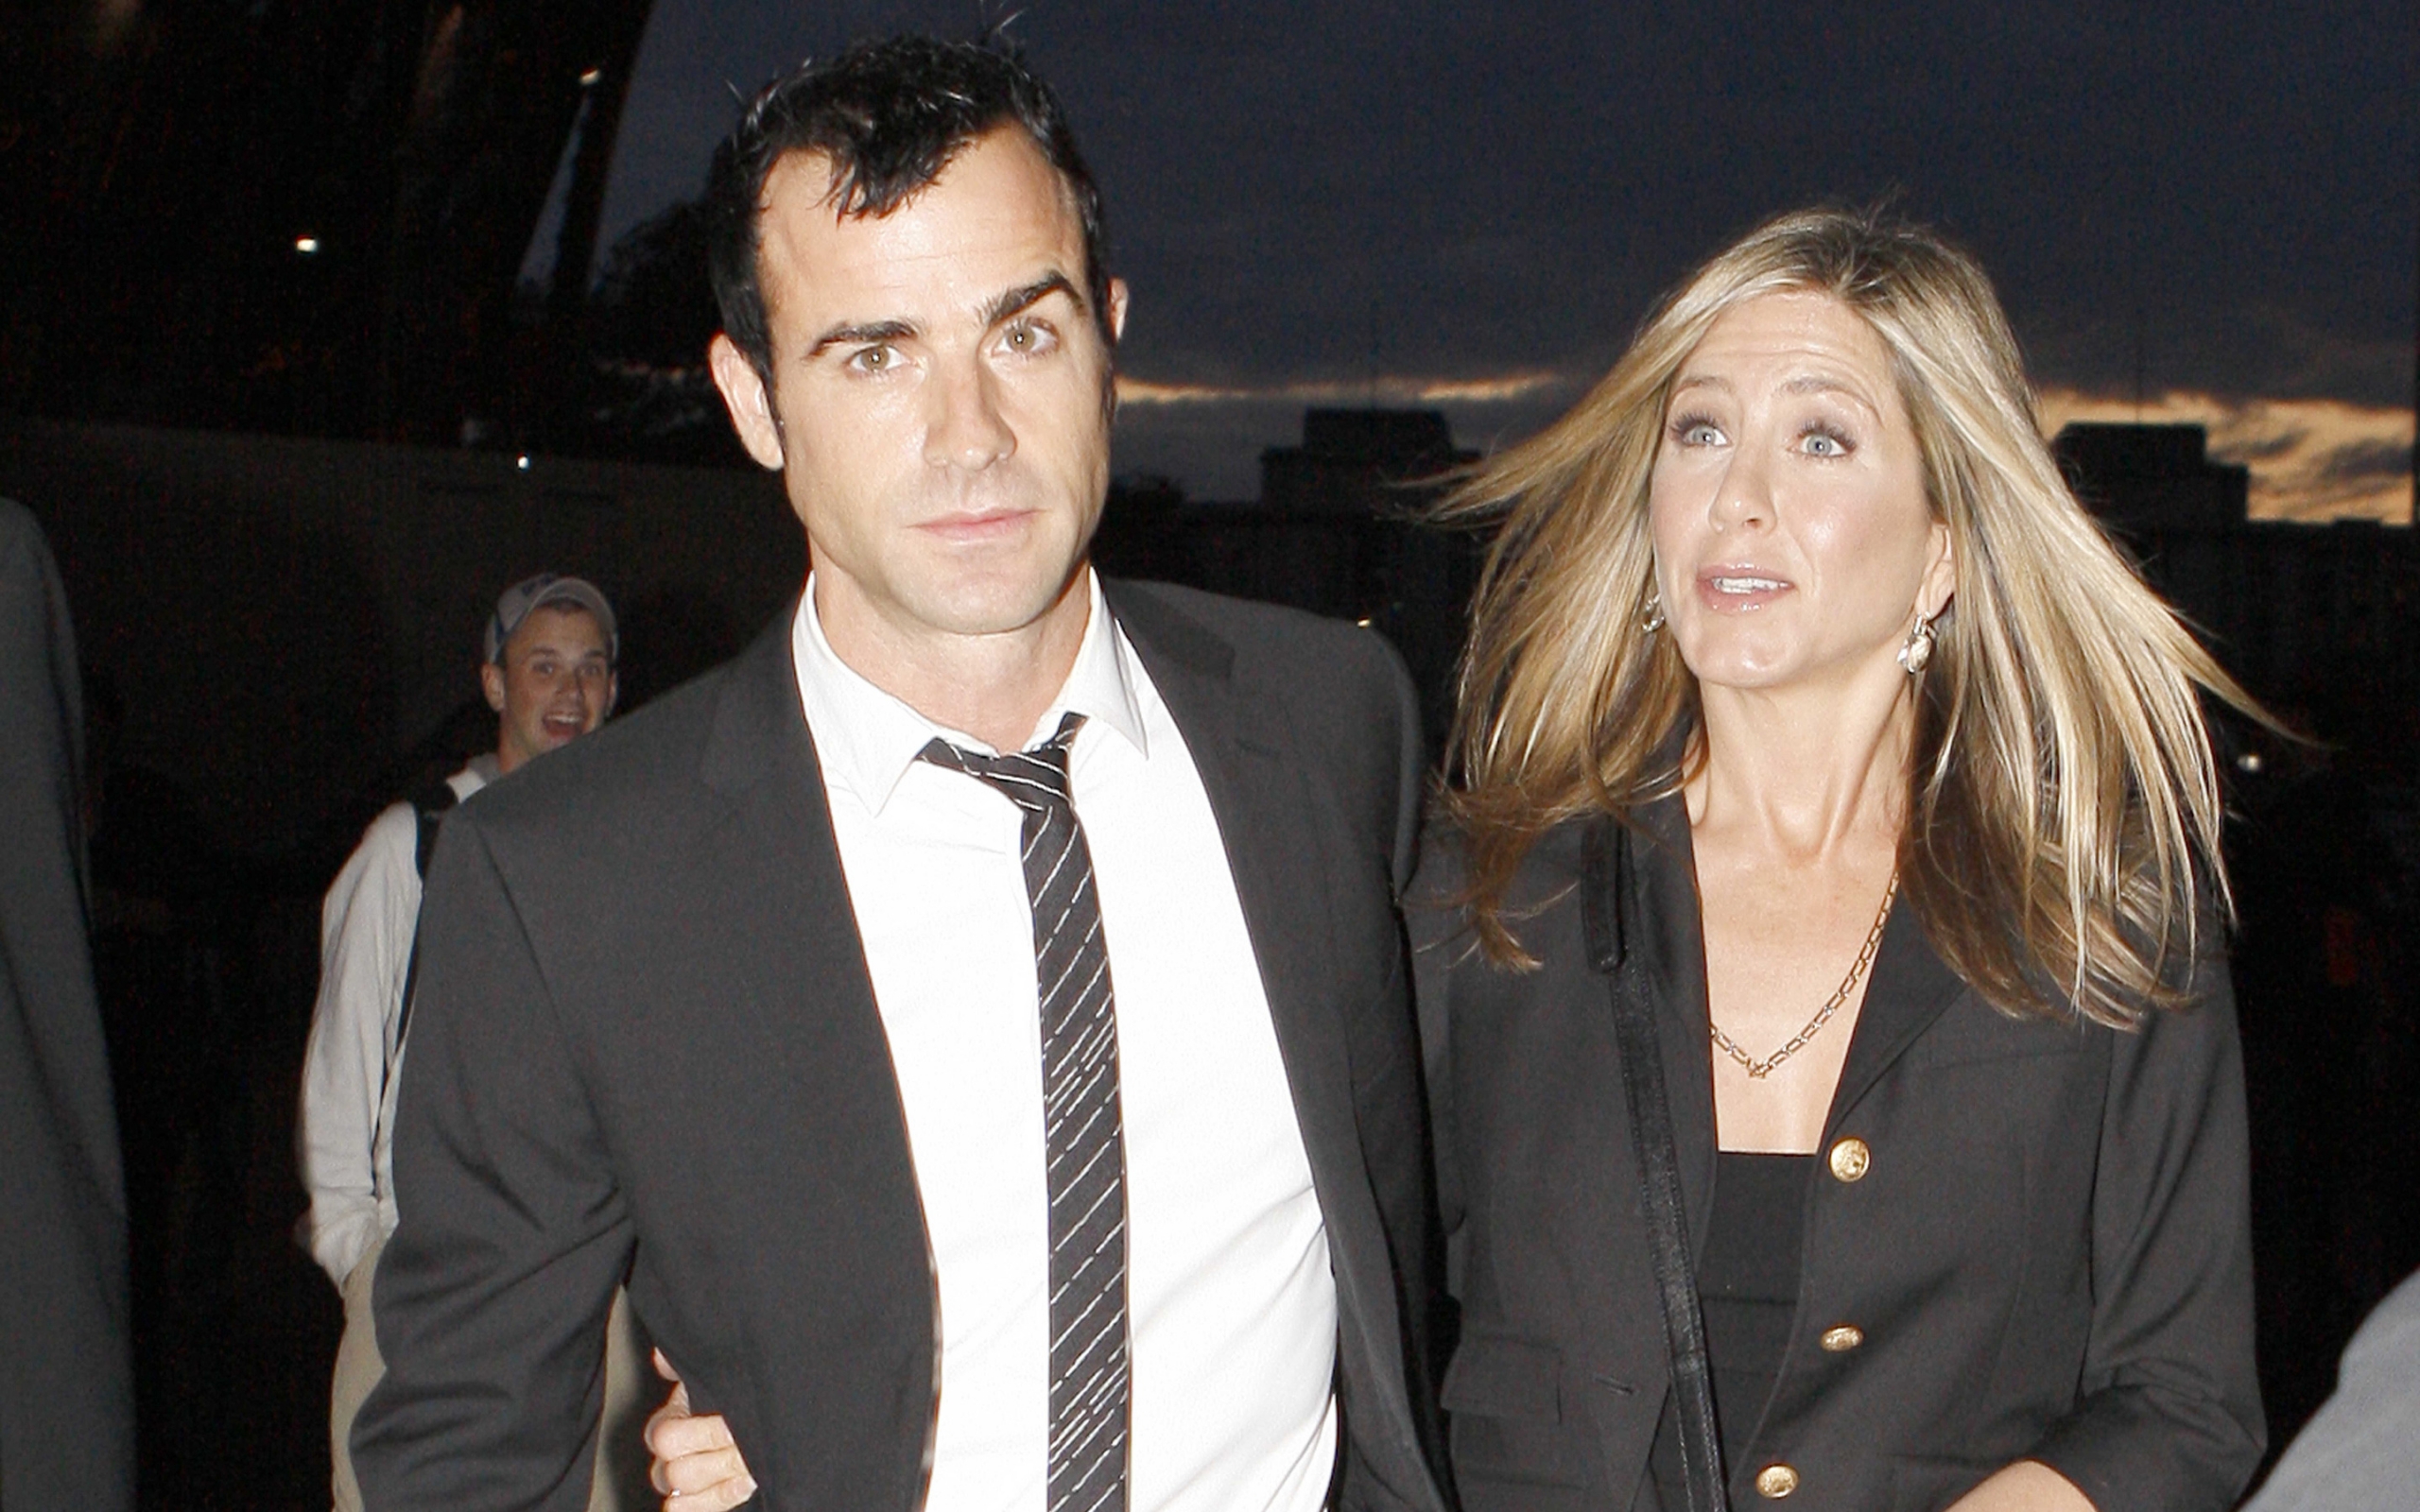 Jennifer Aniston and Justin Theroux for 2560 x 1600 widescreen resolution